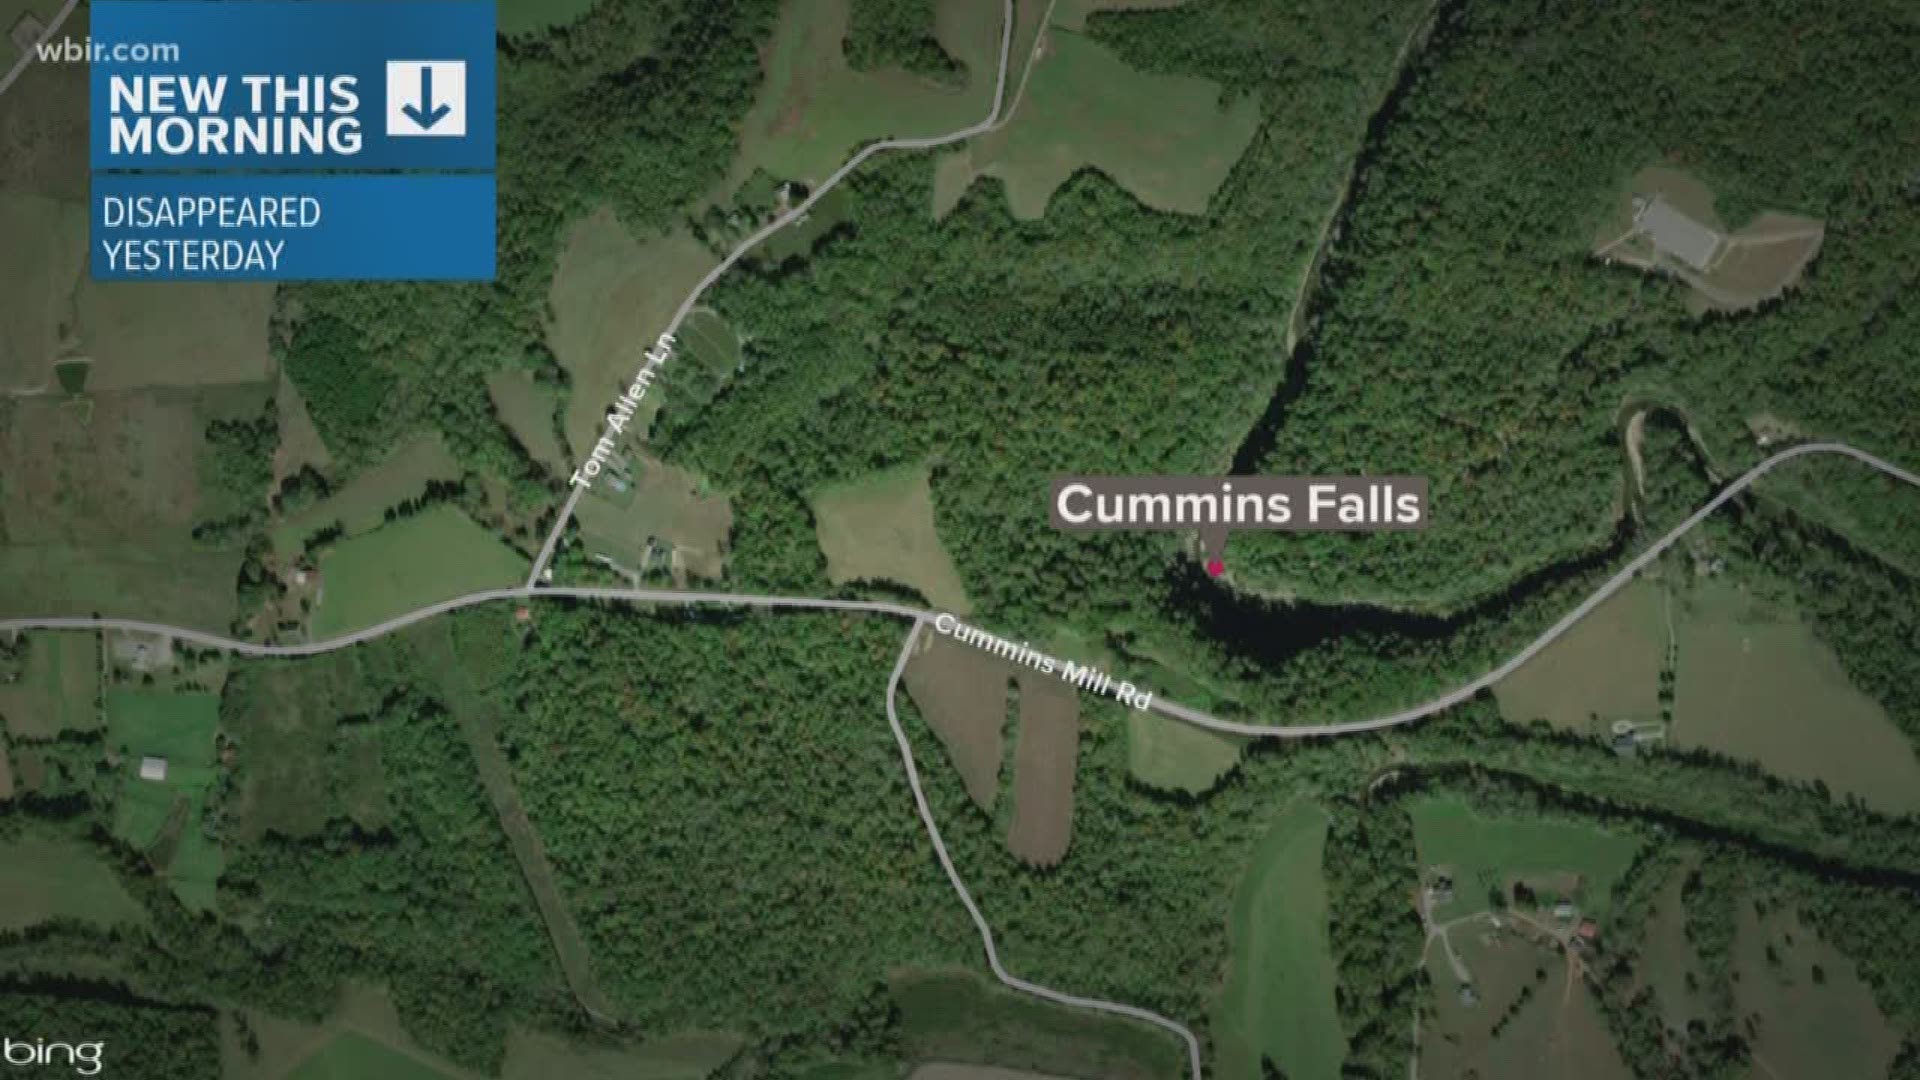 Rescue crews are searching for a missing two-year old boy who may have been trapped by heavy flooding. He disappeared last night at Cummins Falls in Jackson County in Middle Tennessee. Crews say flooding trapped about 50 people at the popular swimming spot and 15 had to be rescued.